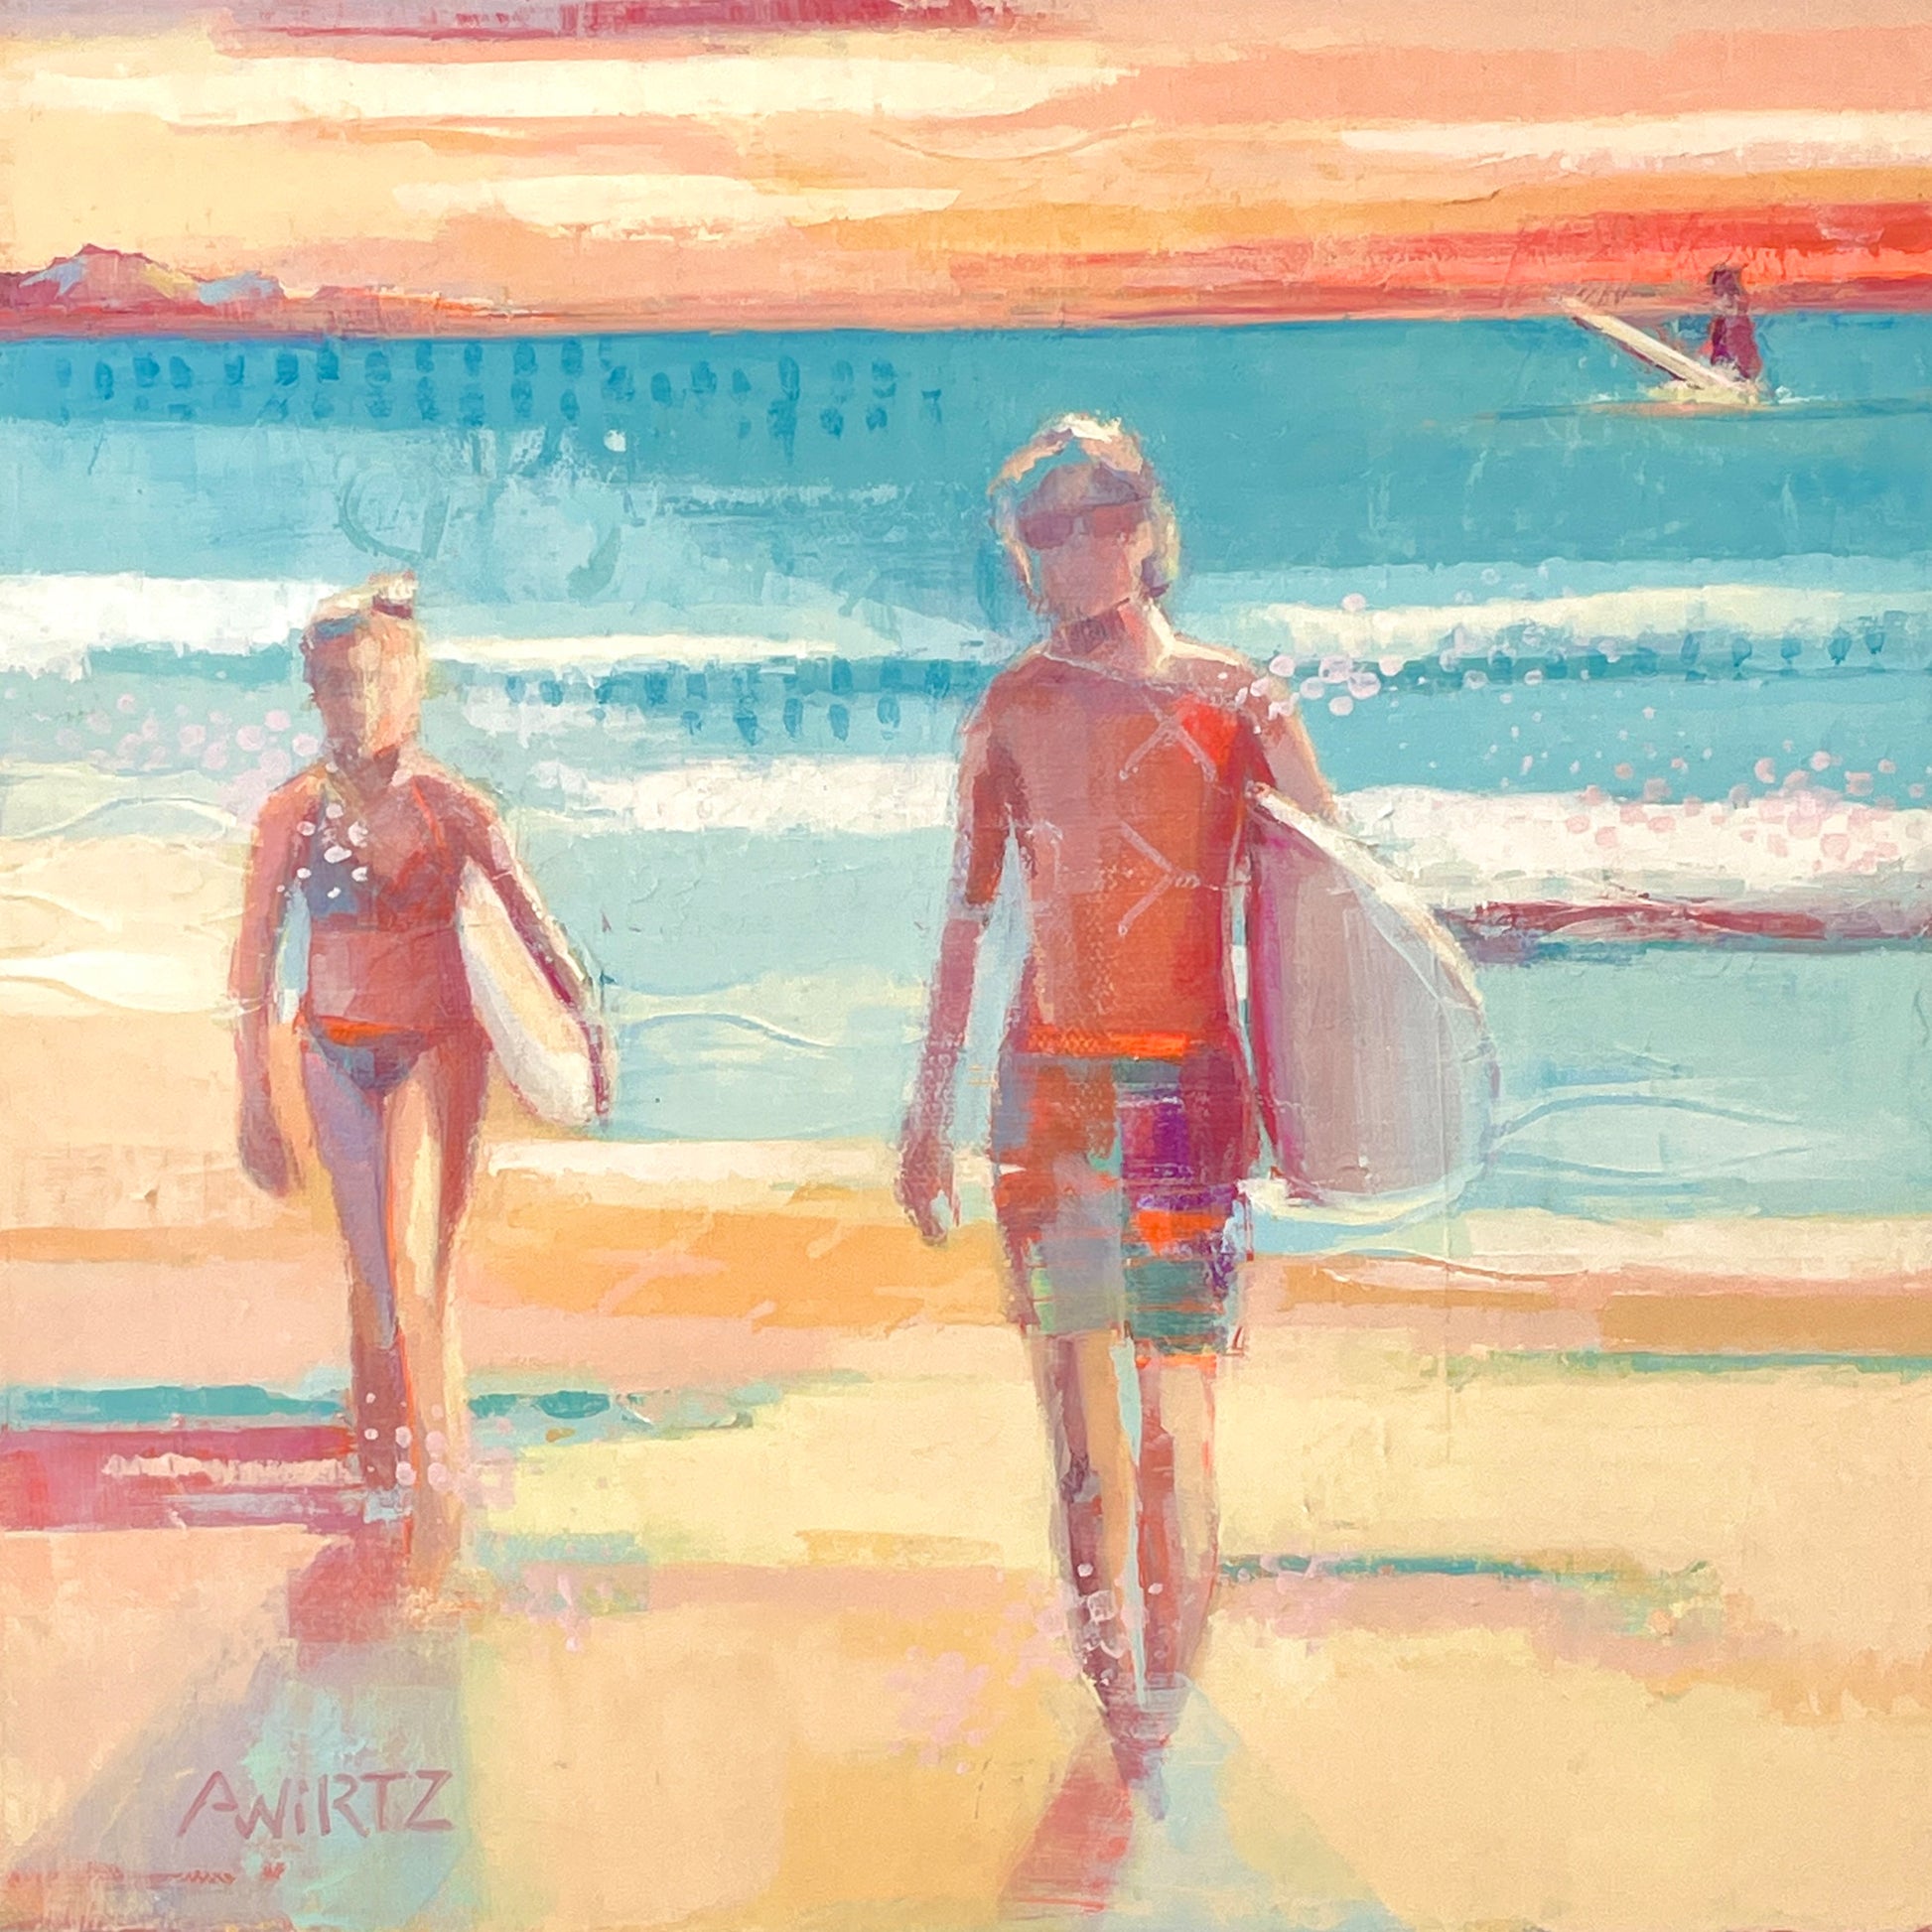 A bright and contemporary acrylic painting on canvas. This painting perfectly describes the end of a surf day. Layered with bright beachy colors with rich textures and patterns this small painting packs a punch and would brighten any space with fun California vibes.